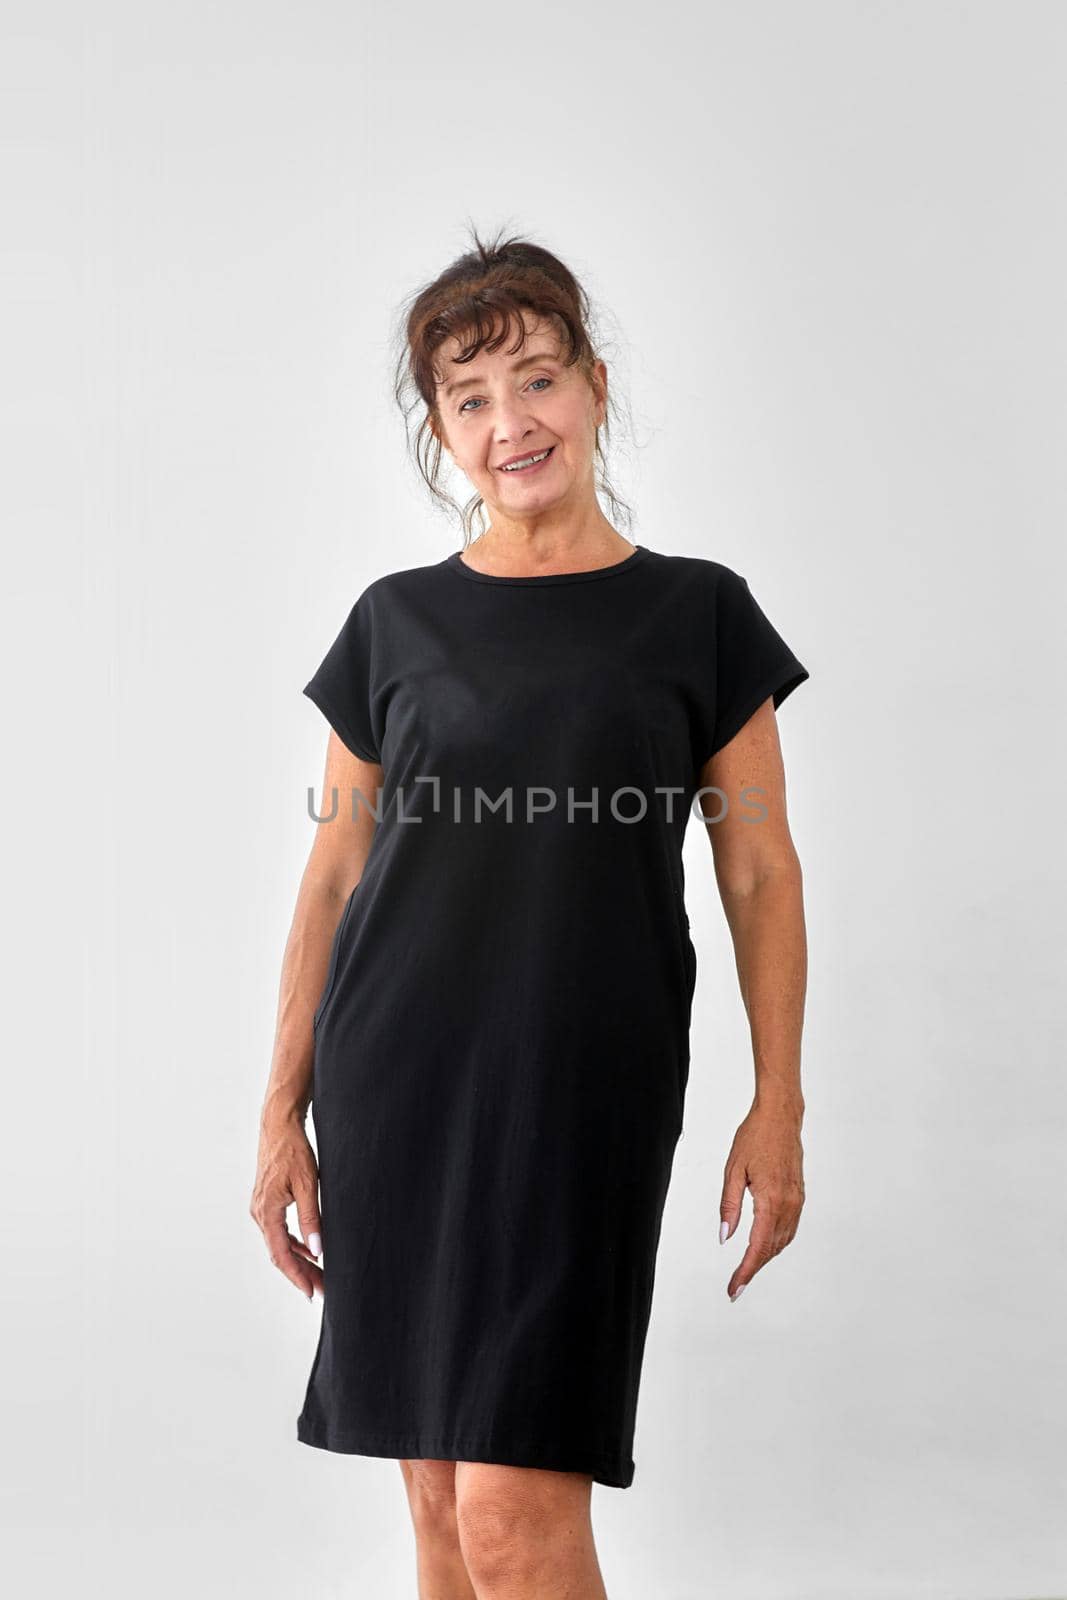 Smiling mature female model in casual black dress looking at camera against white background